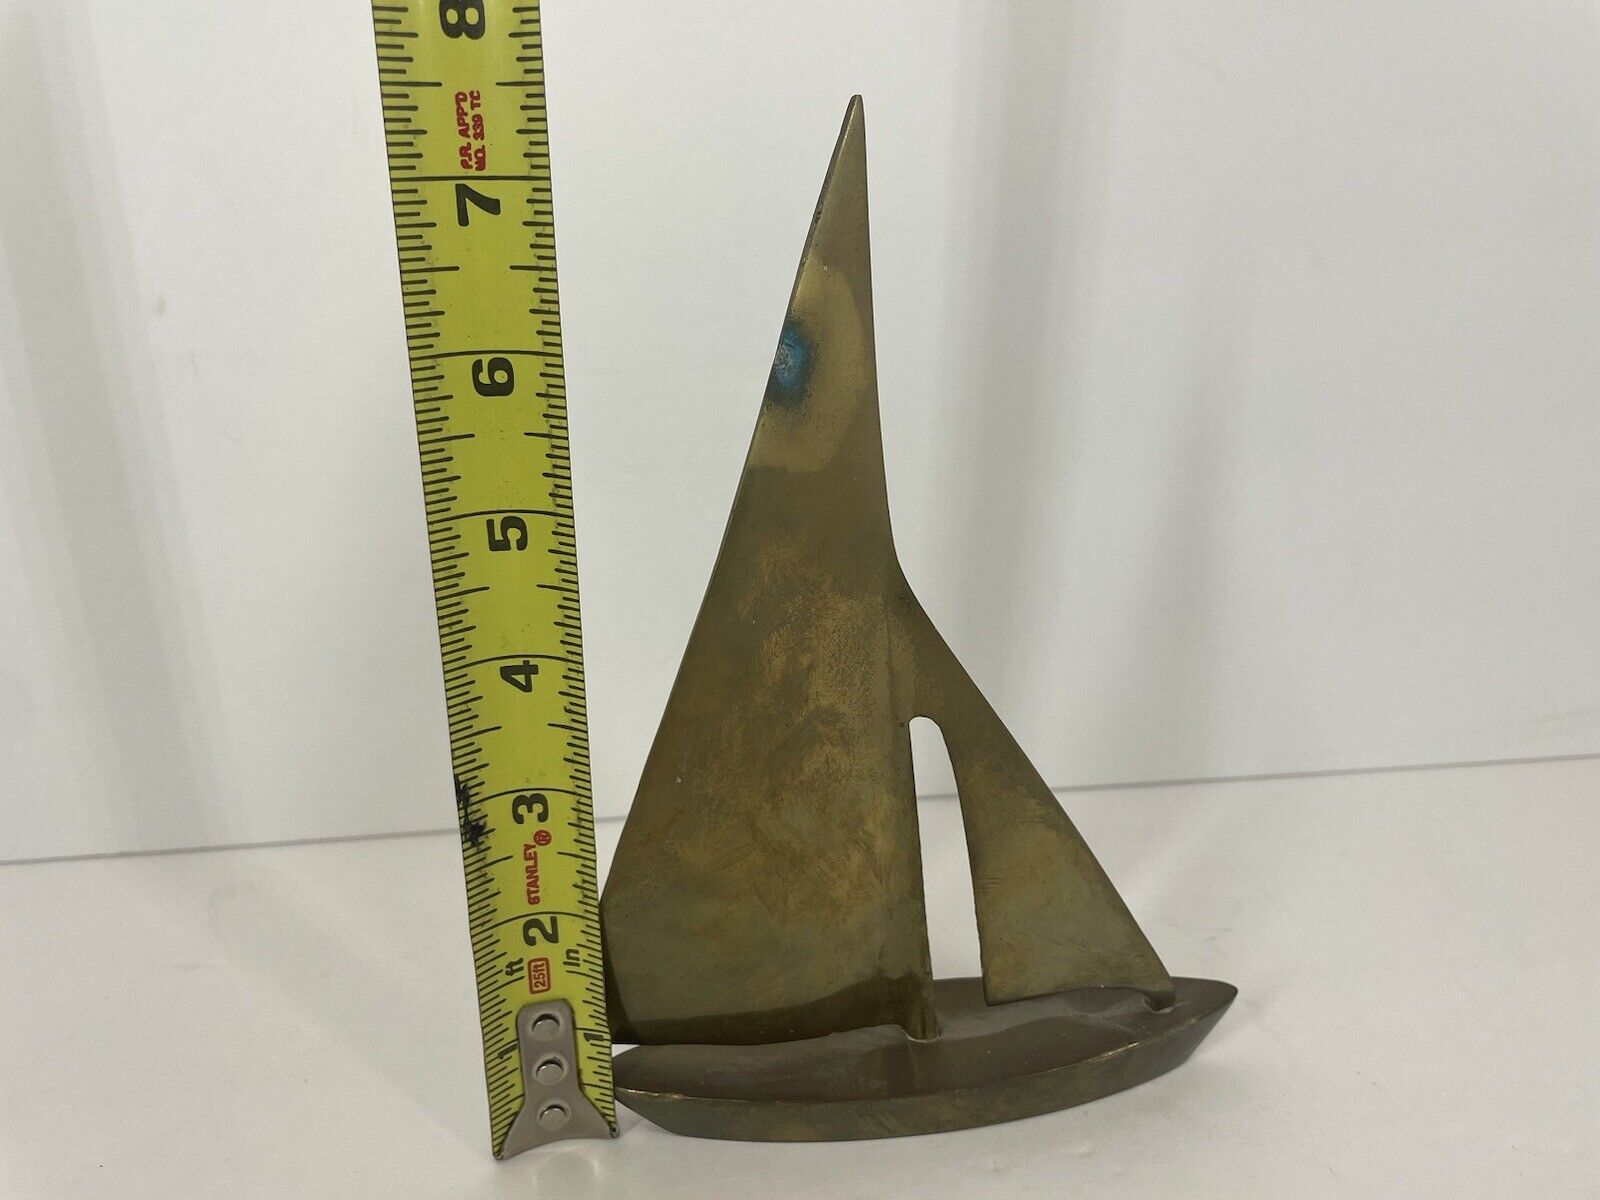 Vintage Solid Brass Nautical Sailboat Figurine paper weight office home decor